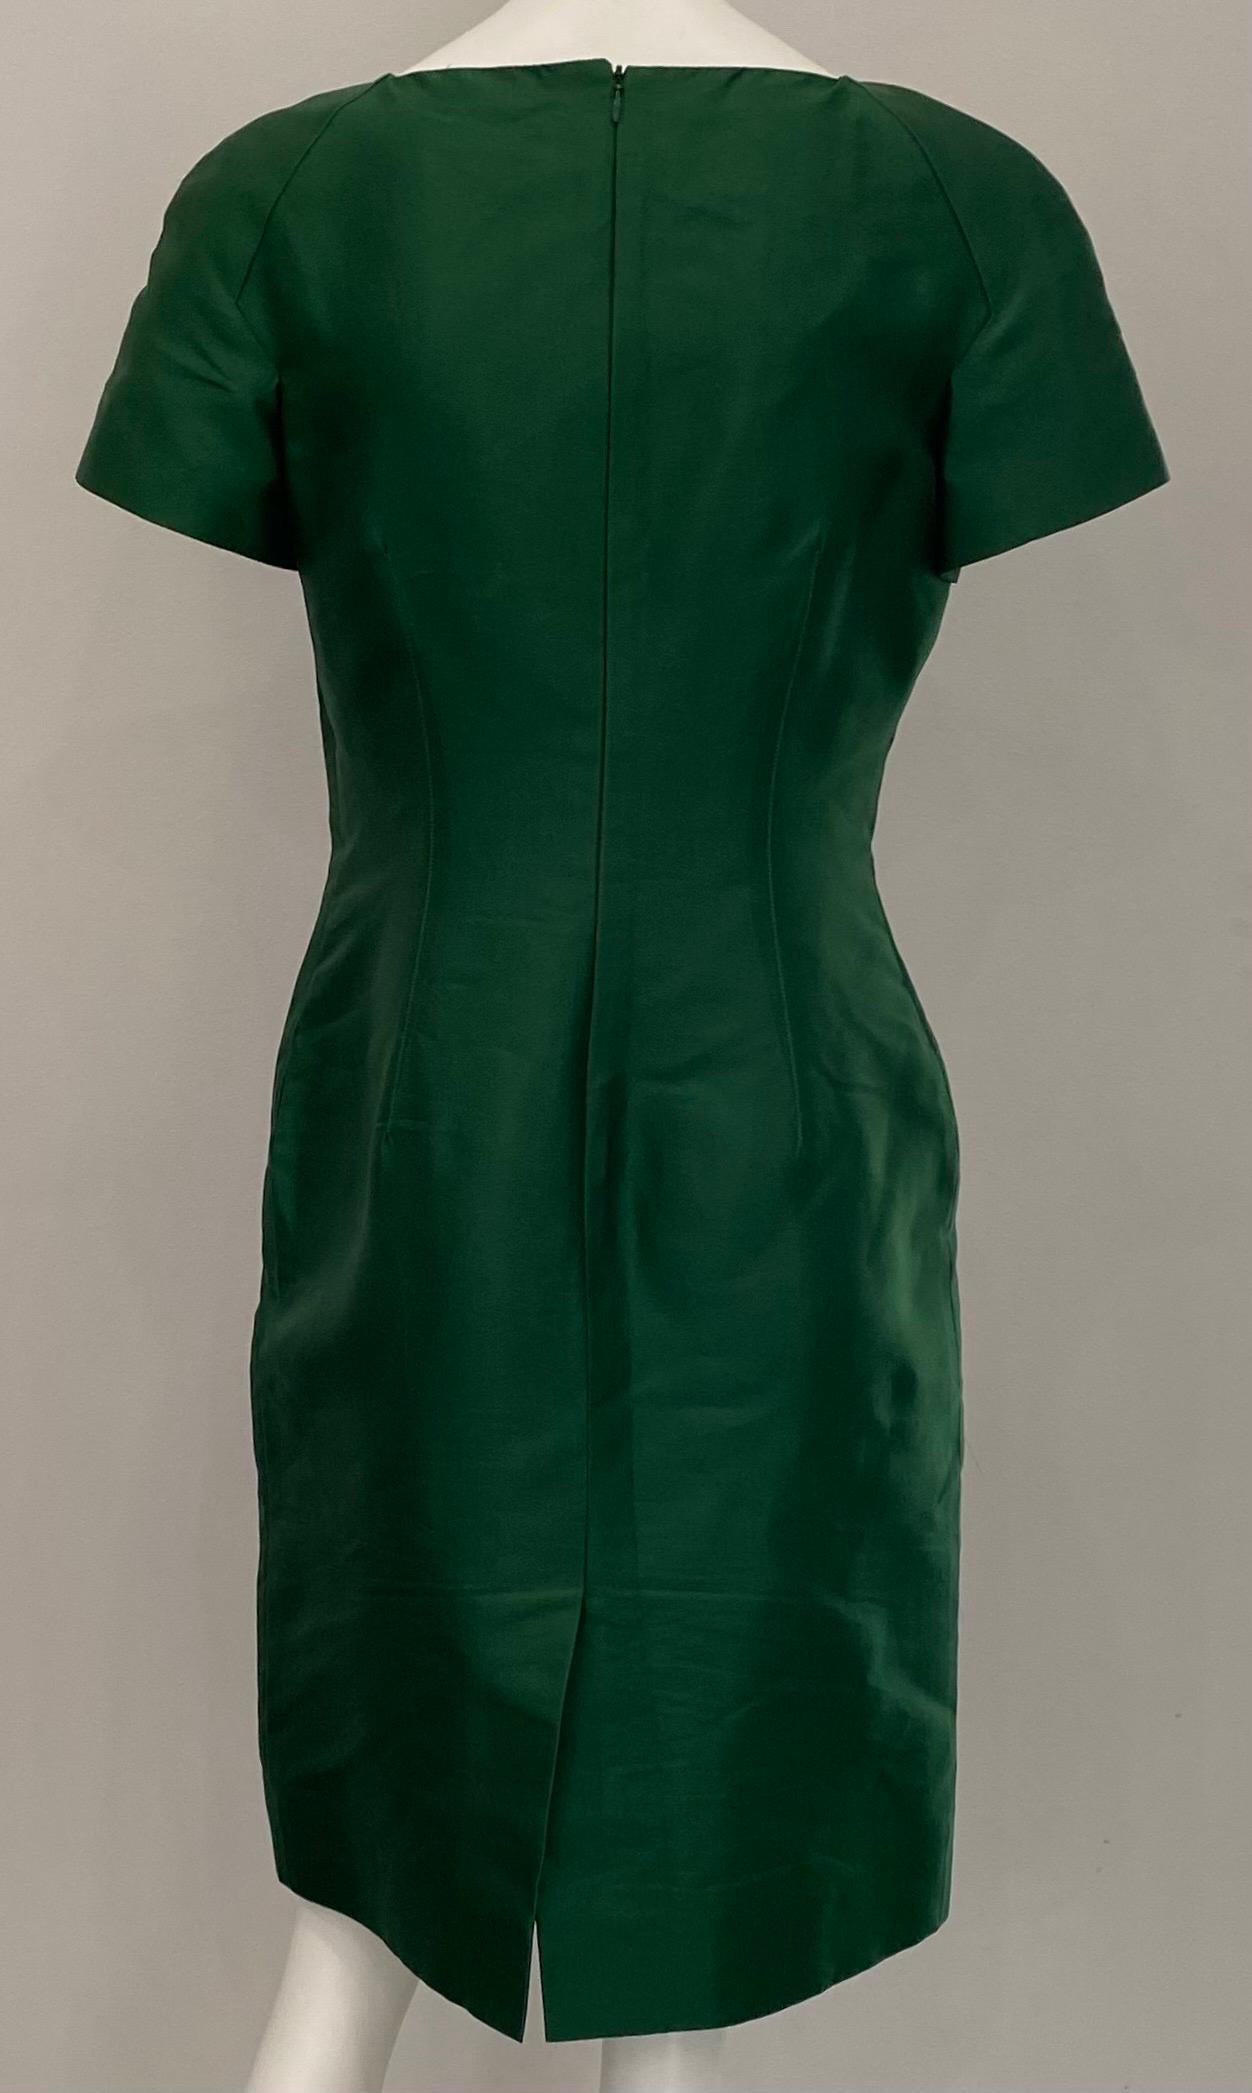 Valentino Emerald Green Silk and Lace Cap Sleeve Sheath Dress - Sz 8 In Excellent Condition For Sale In West Palm Beach, FL